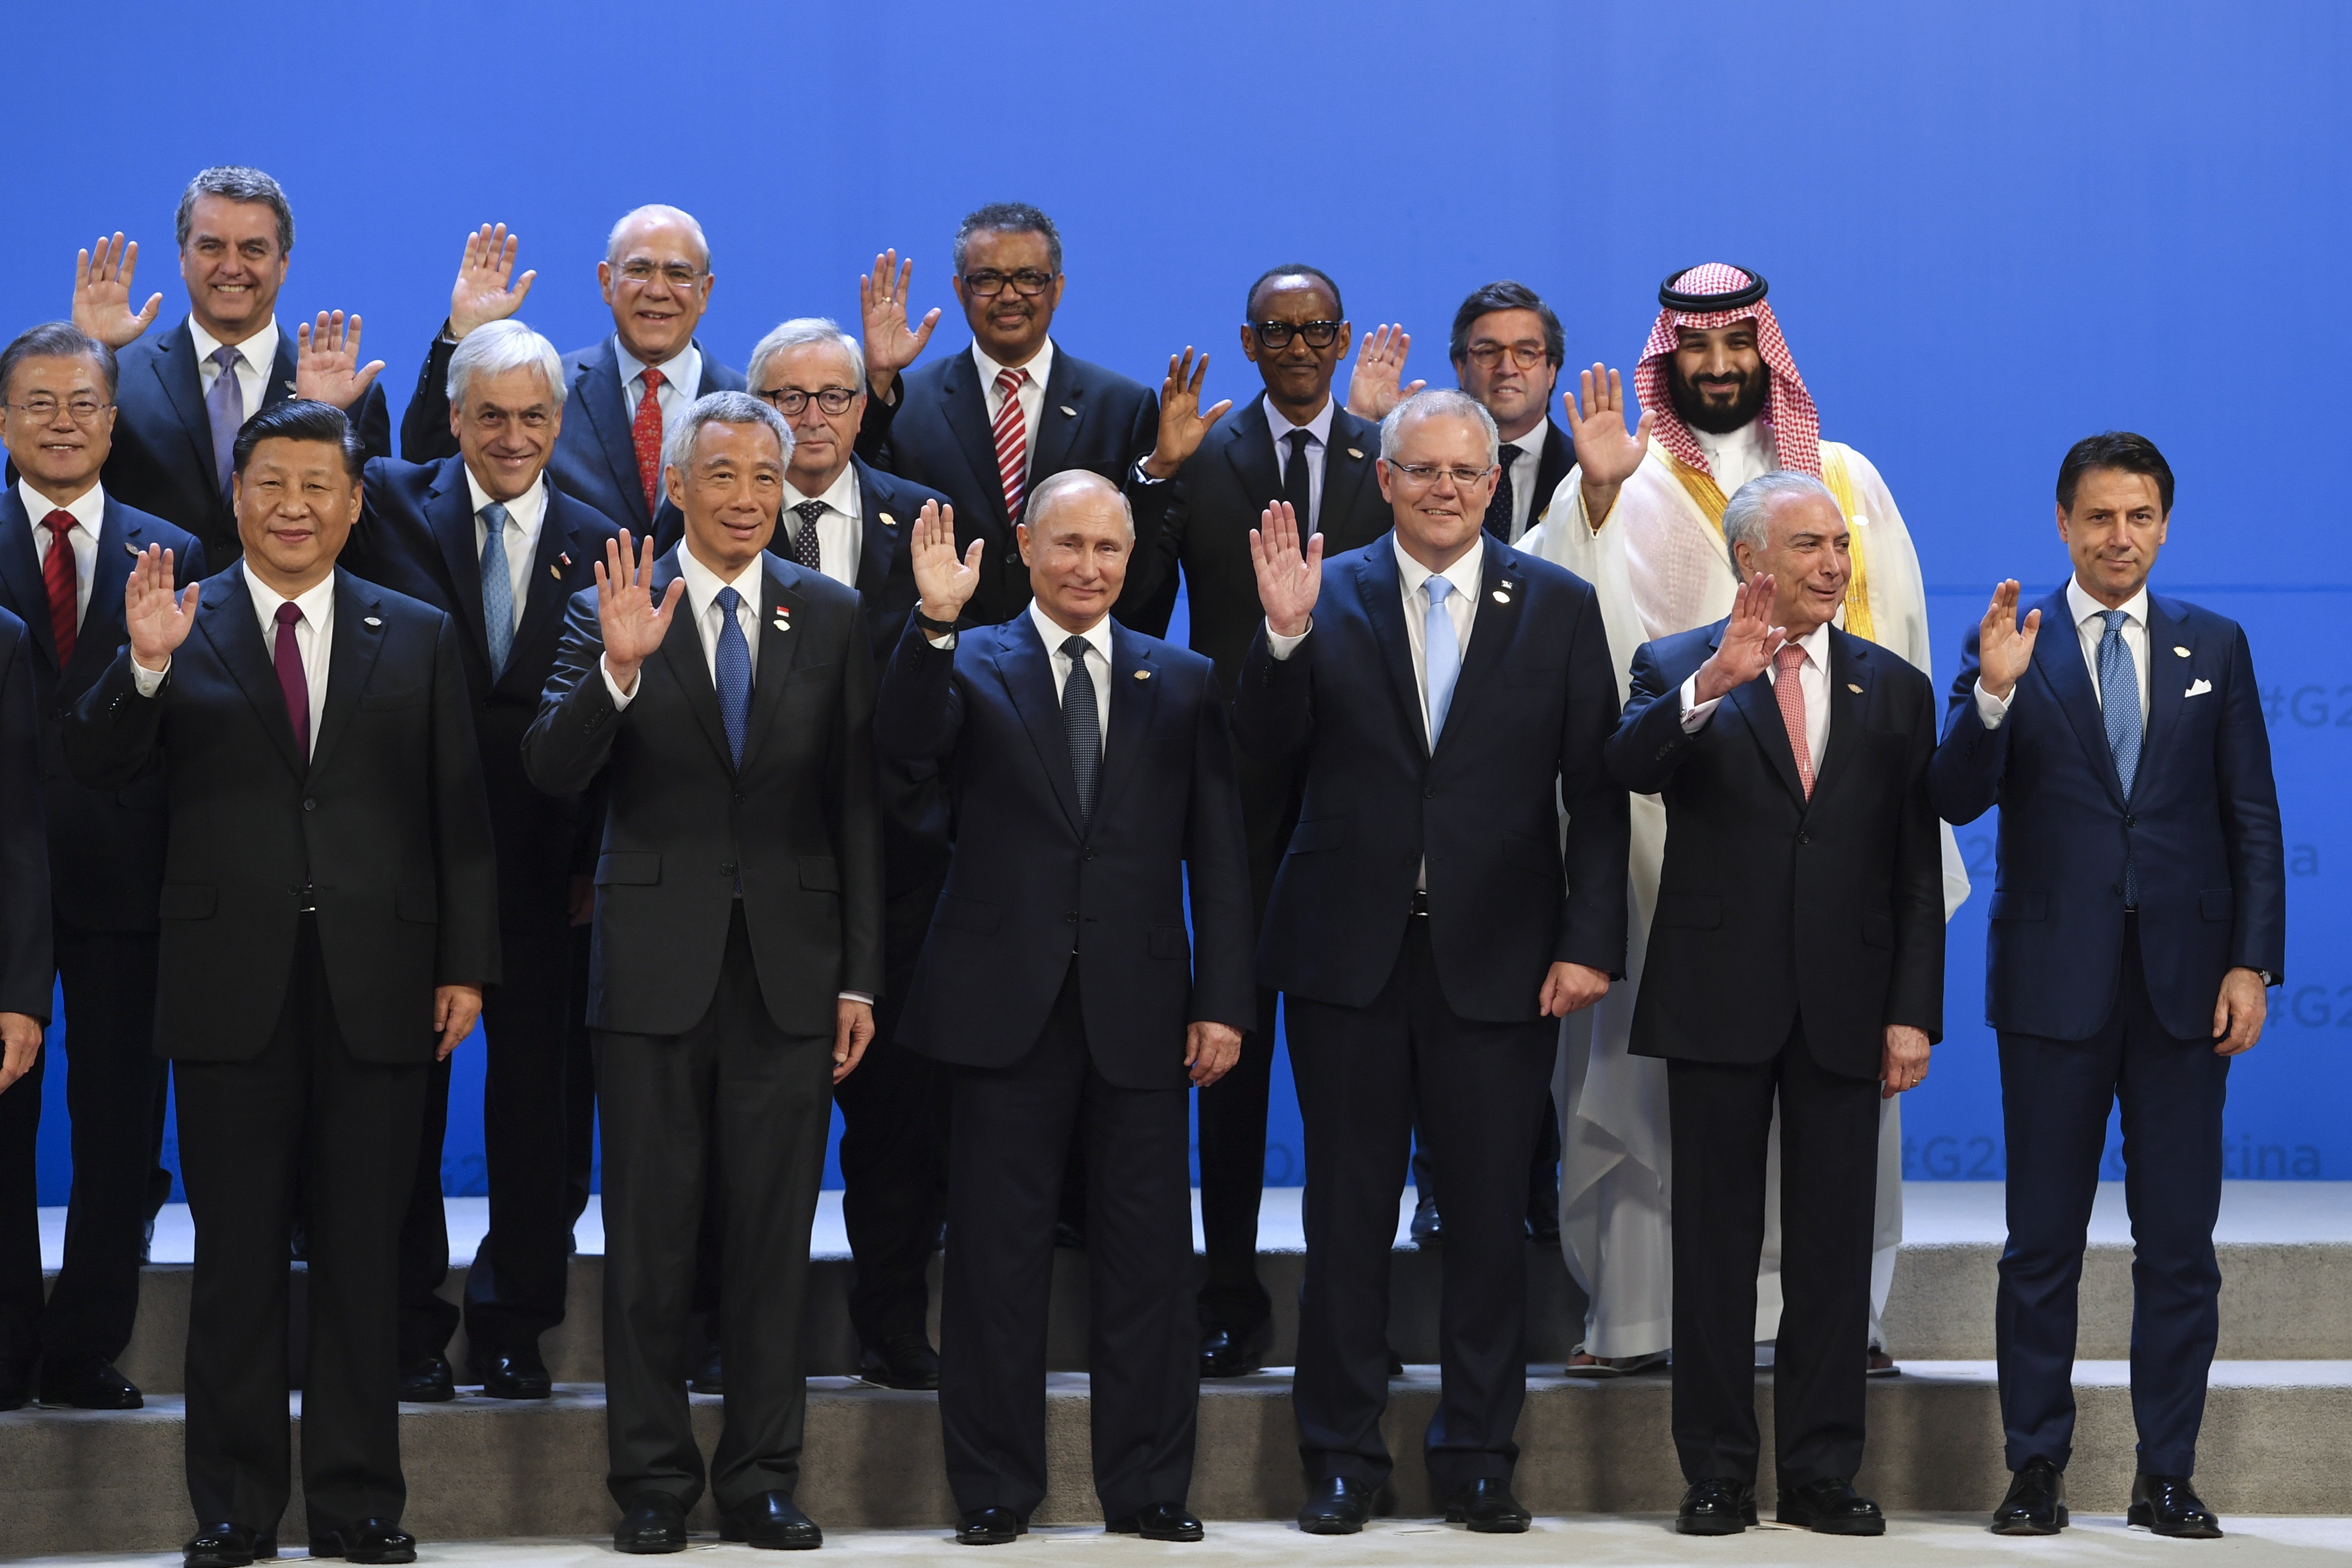 Part of the ‘family photo’ featuring world leaders including Saudi Arabia’s Mohammed bin Salman at the G20 summit in Buenos Aires, Argentina, on November 30, 2018. Photo: EPA